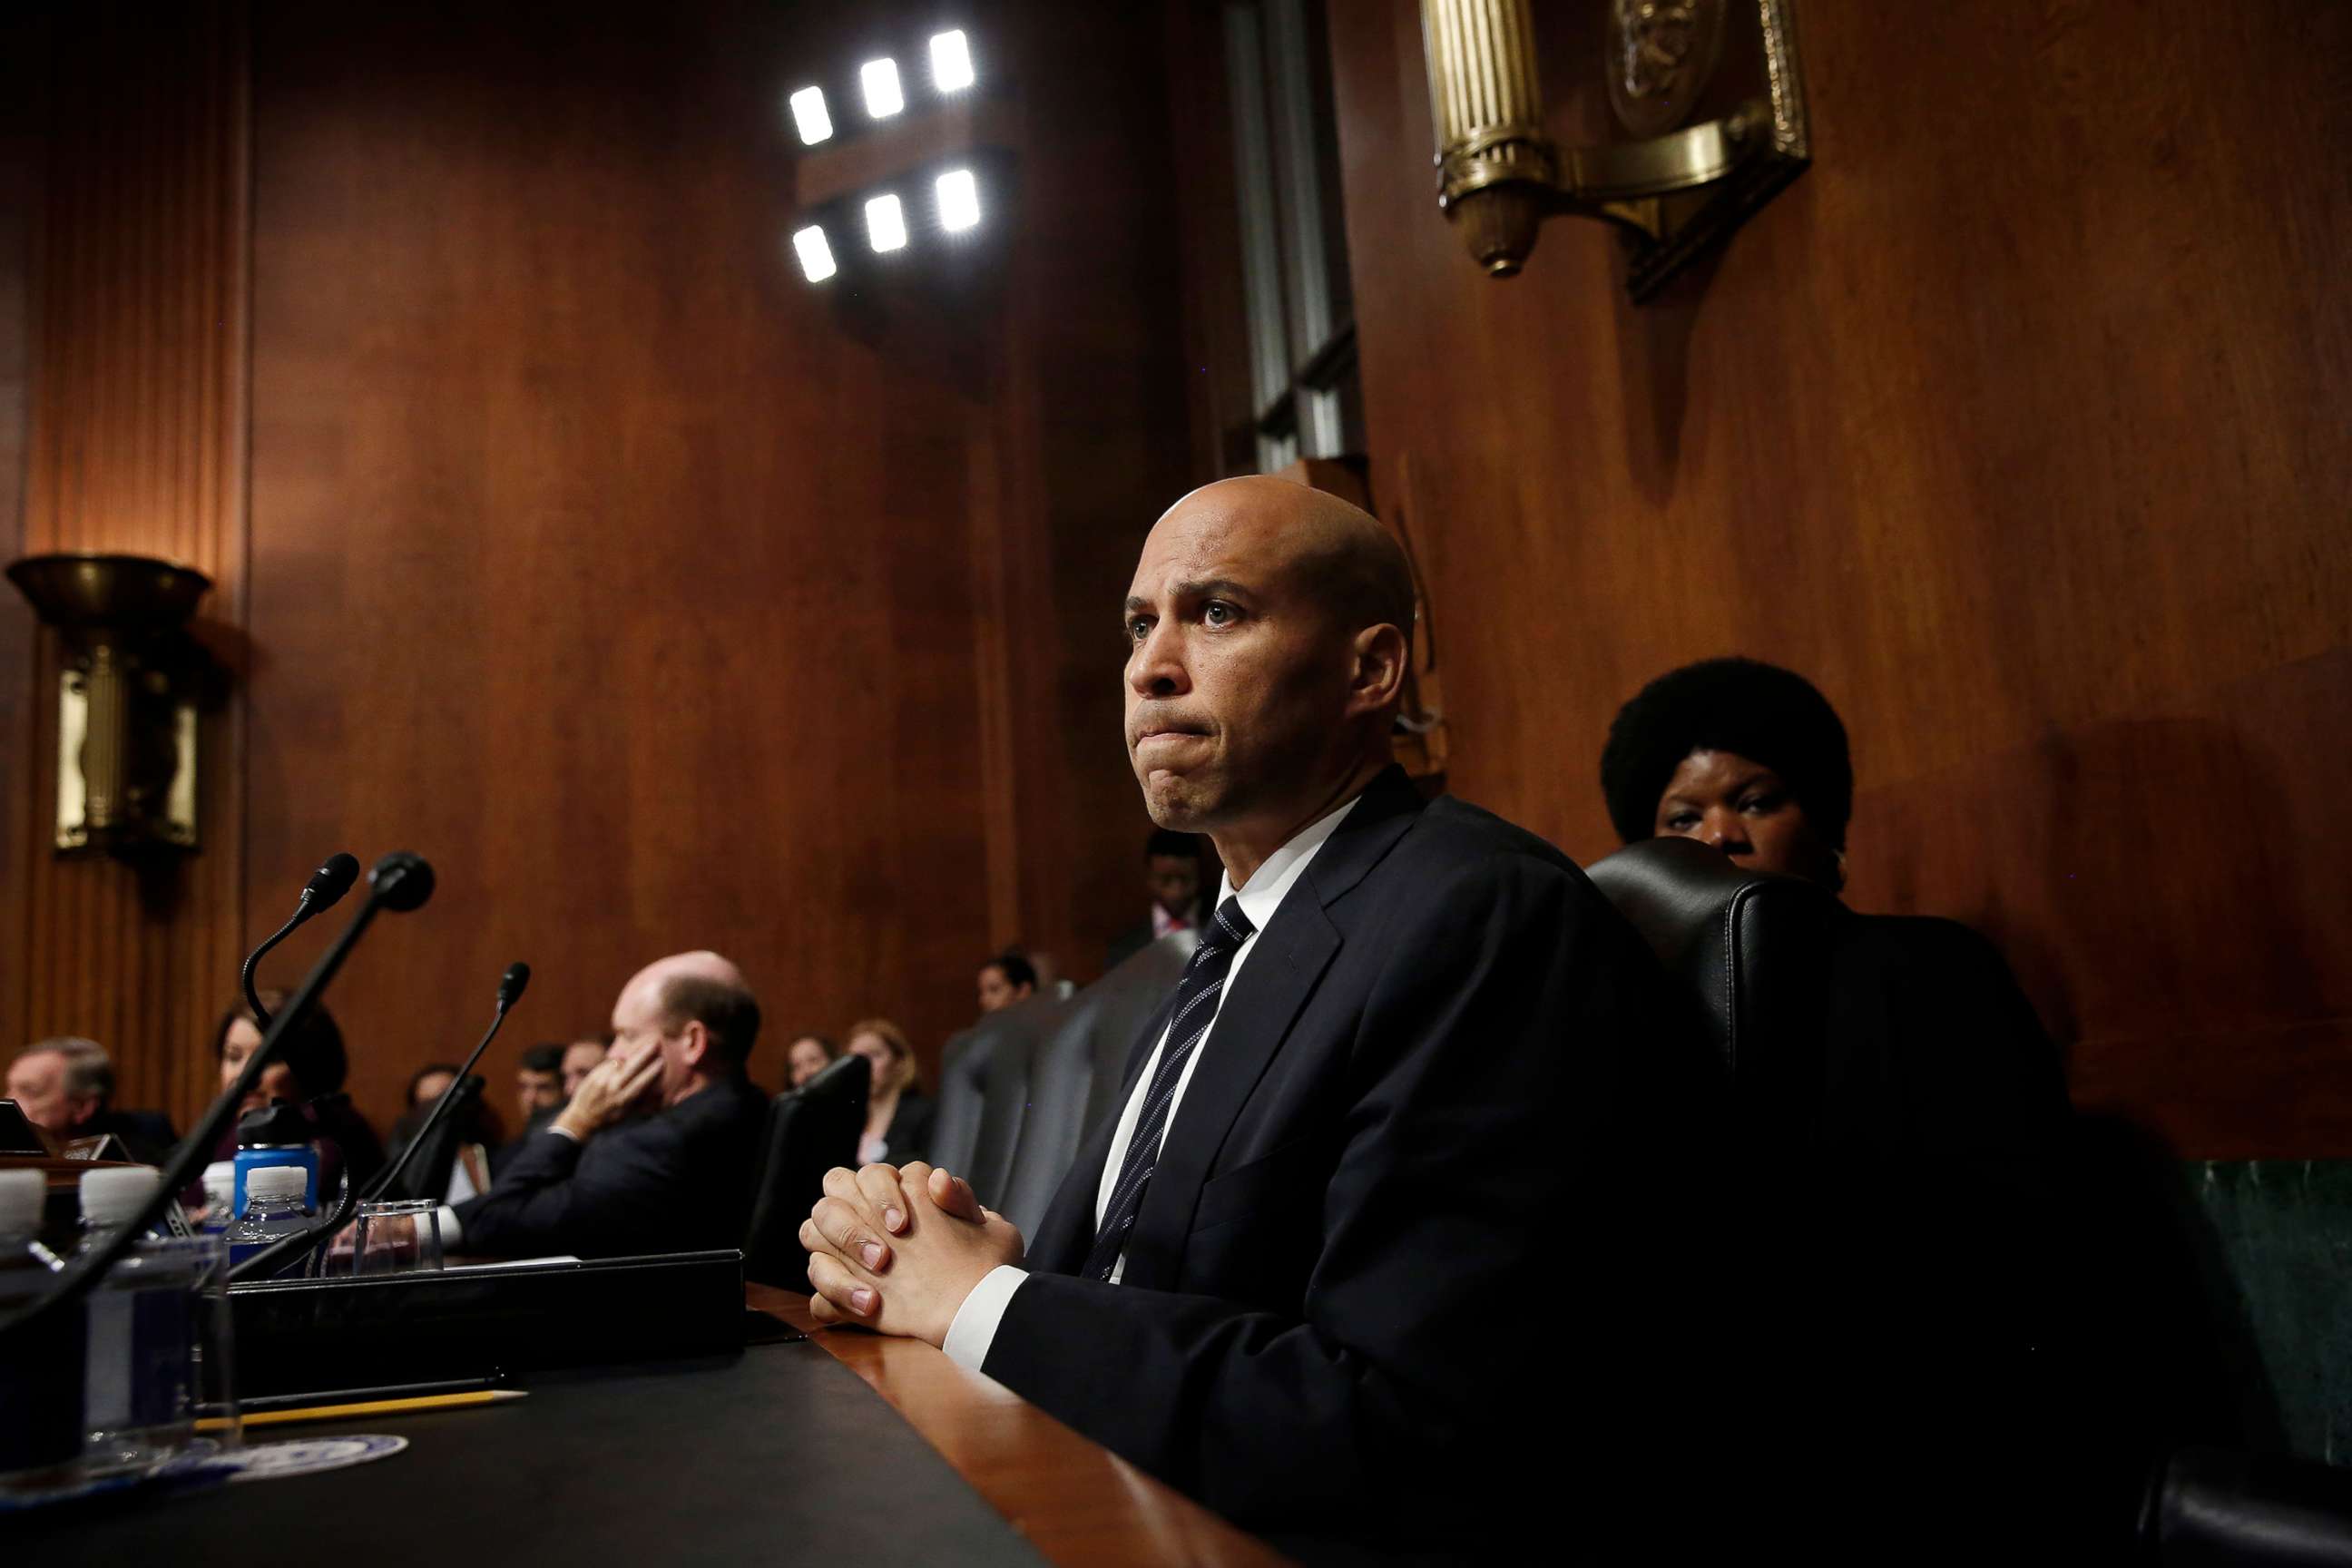 PHOTO: Sen. Cory Booker listens to Republican senators speak after colleagues walked out of a Senate Judiciary Committee meeting, Sept. 28, 2018 in Washington, D.C. during discussions on the nomination of Judge Brett Kavanaugh to the U.S. Supreme Court.